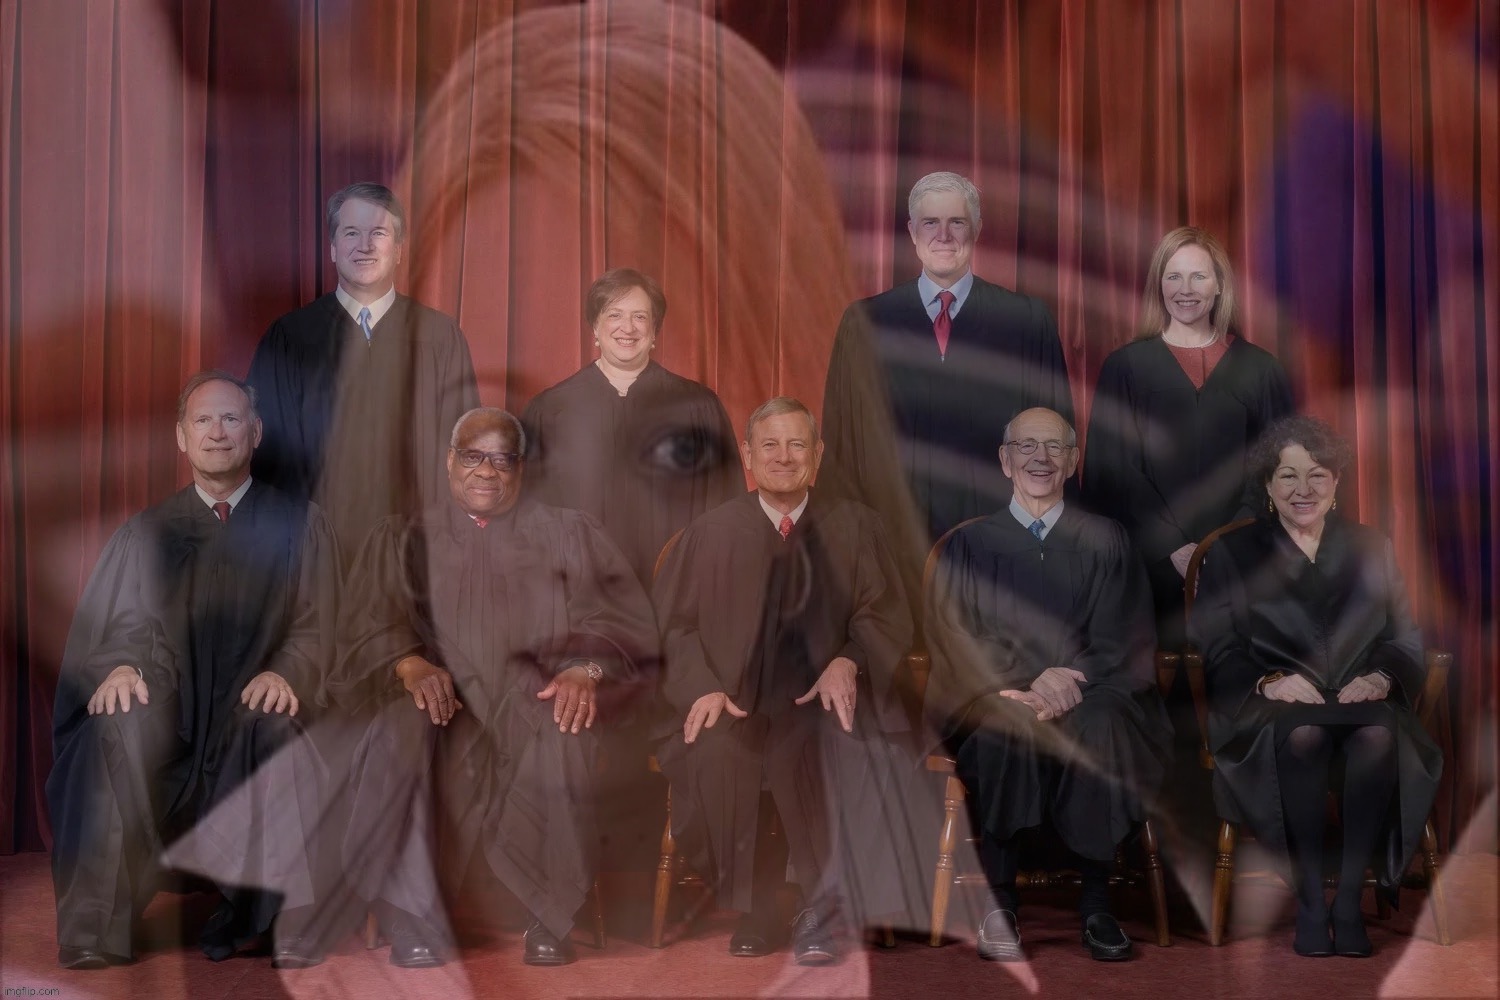 SCOTUS it’s not going to happen | image tagged in scotus it s not going to happen,its not going to happen,it's not gonna happen,scotus,supreme court,politics lol | made w/ Imgflip meme maker